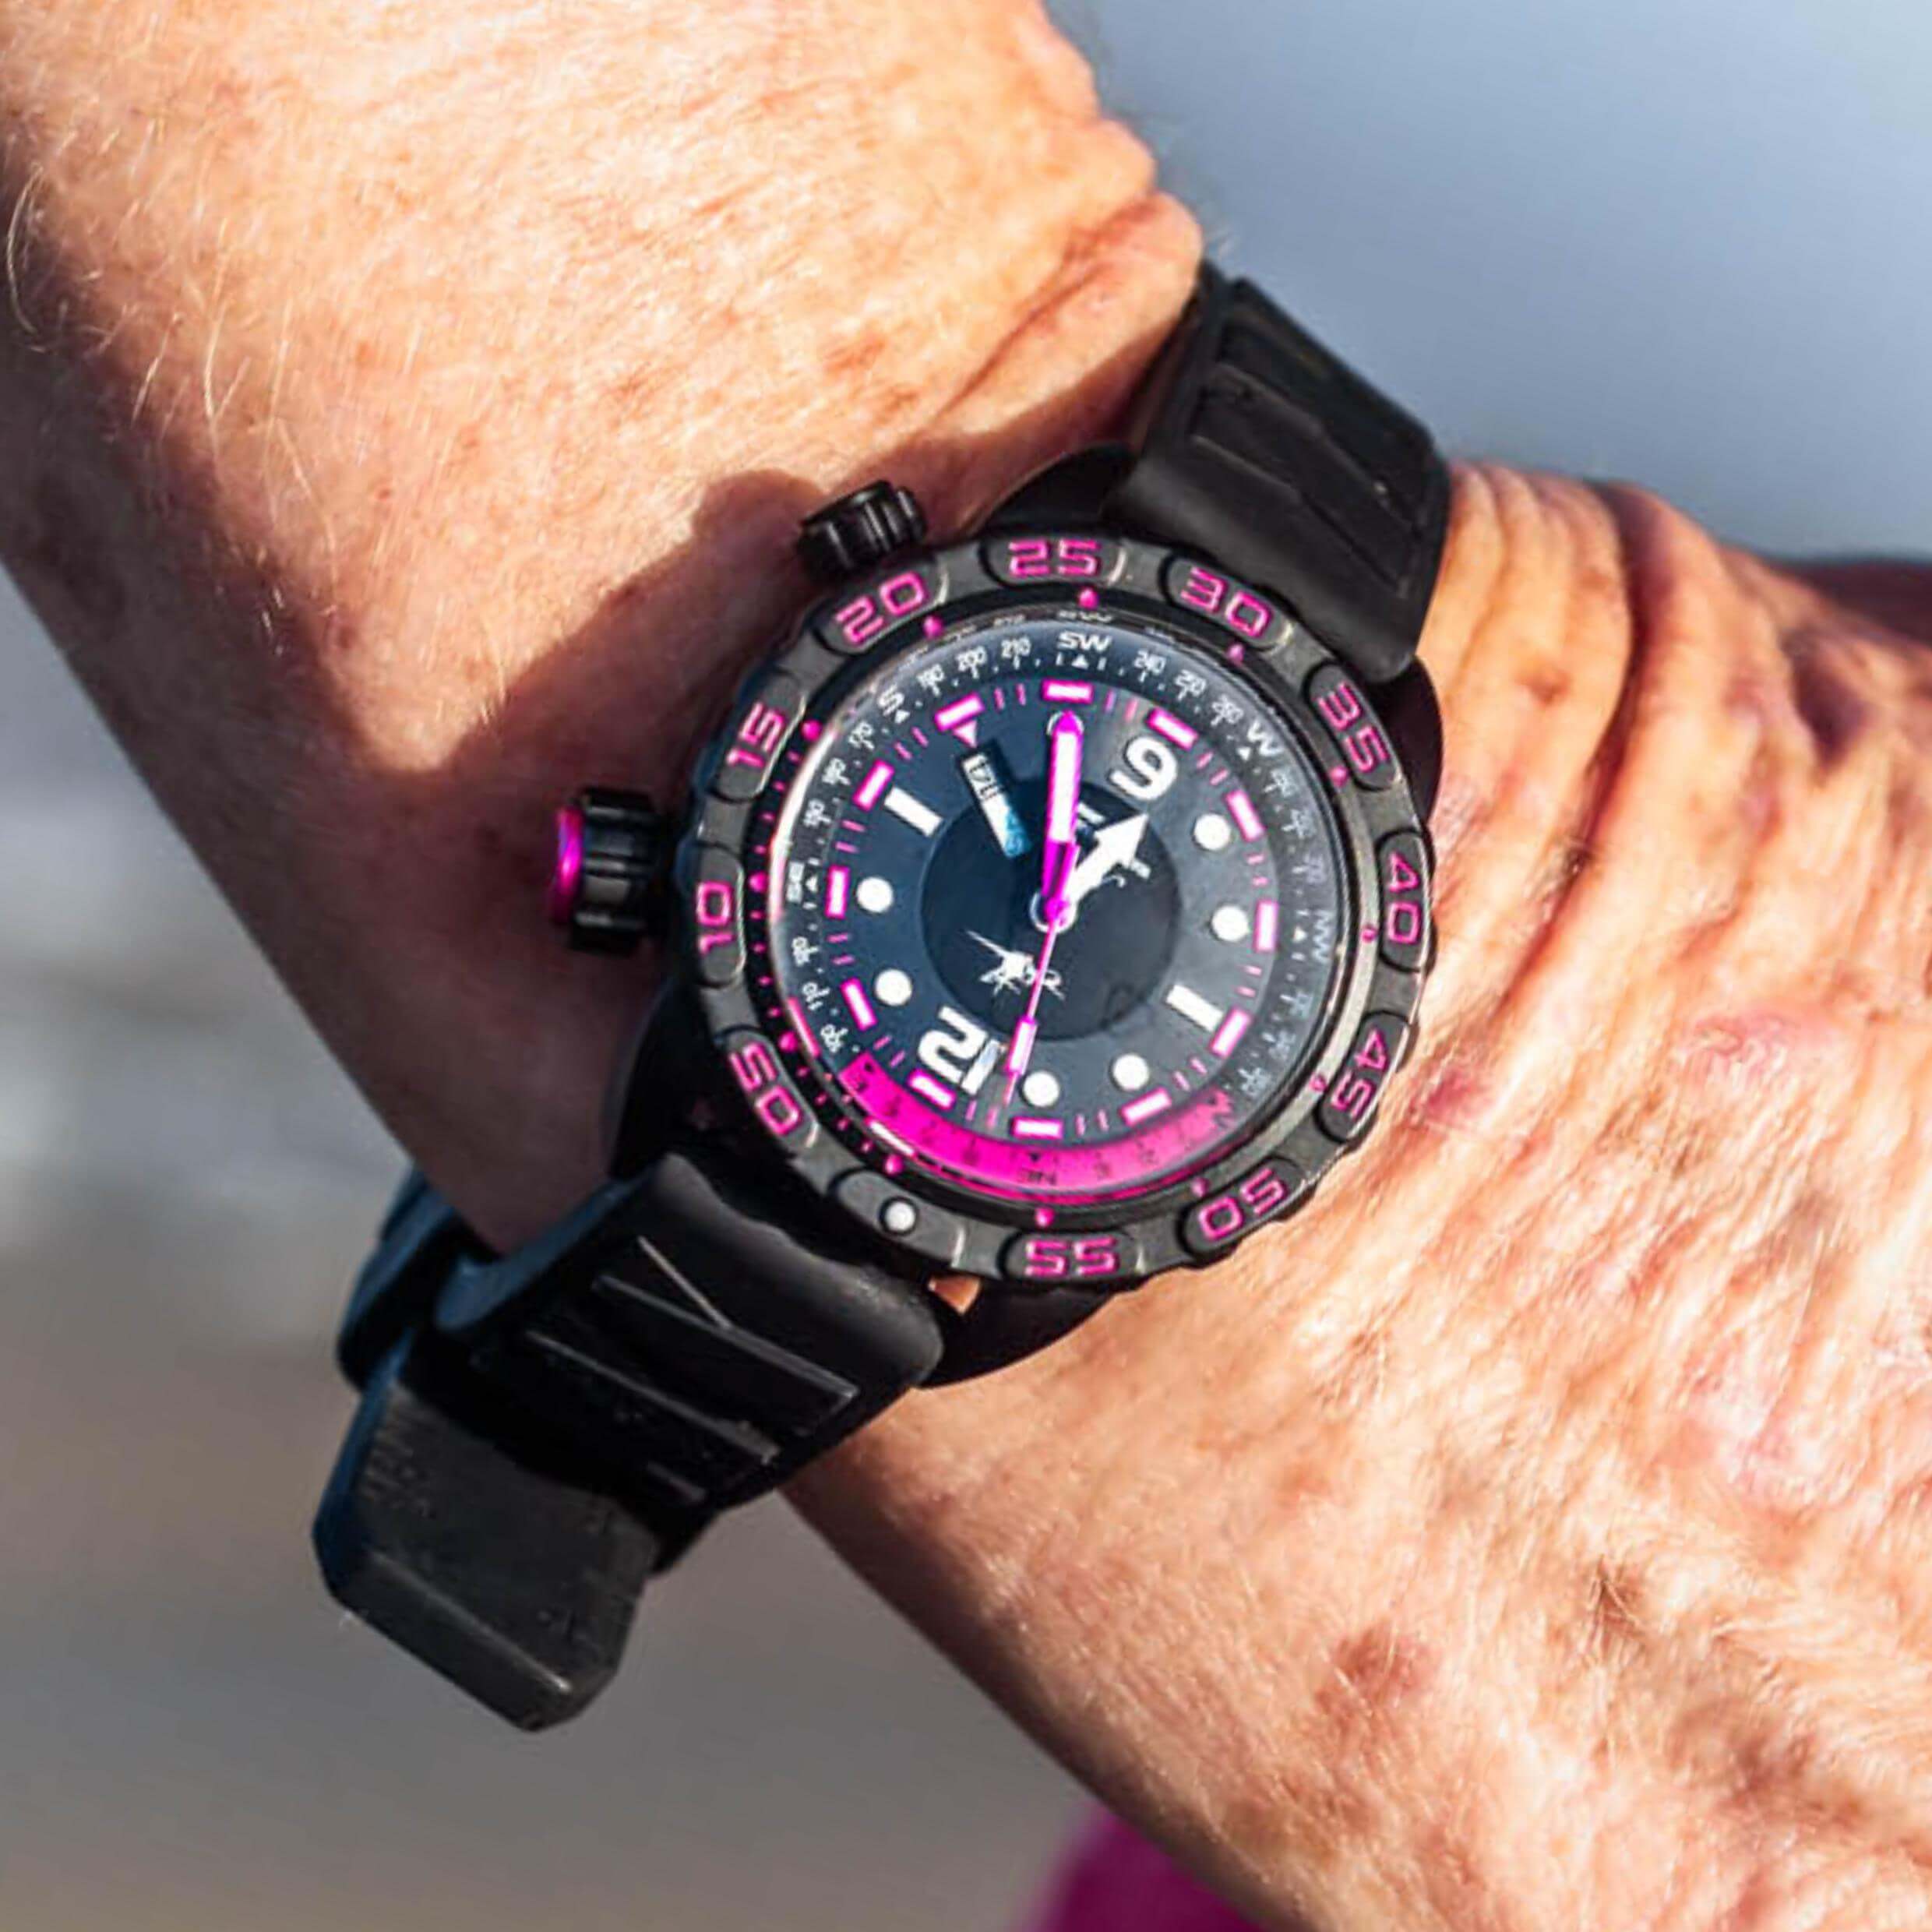 Abingdon Co. Image displays Nadia dive watch on woman's wrist outside in the sun at the beach. Black women's dive watch with hot pink accents.